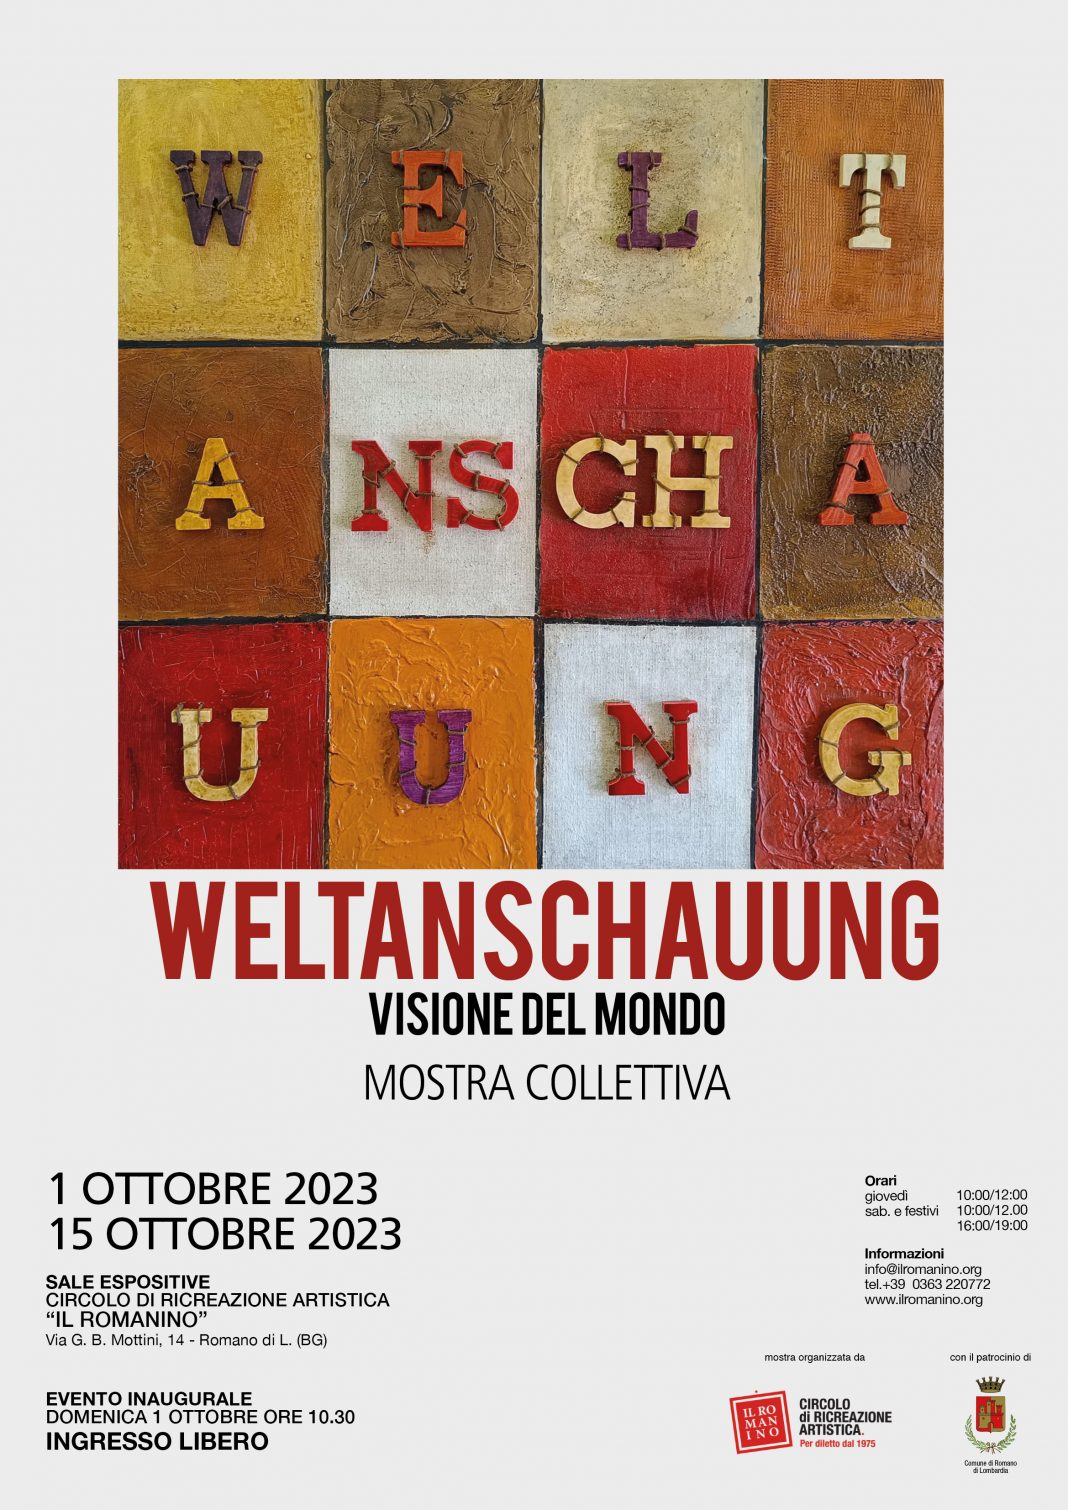 Welthanschauunghttps://www.exibart.com/repository/media/formidable/11/img/0a4/collettiva-ottobre-2023-1068x1510.jpg